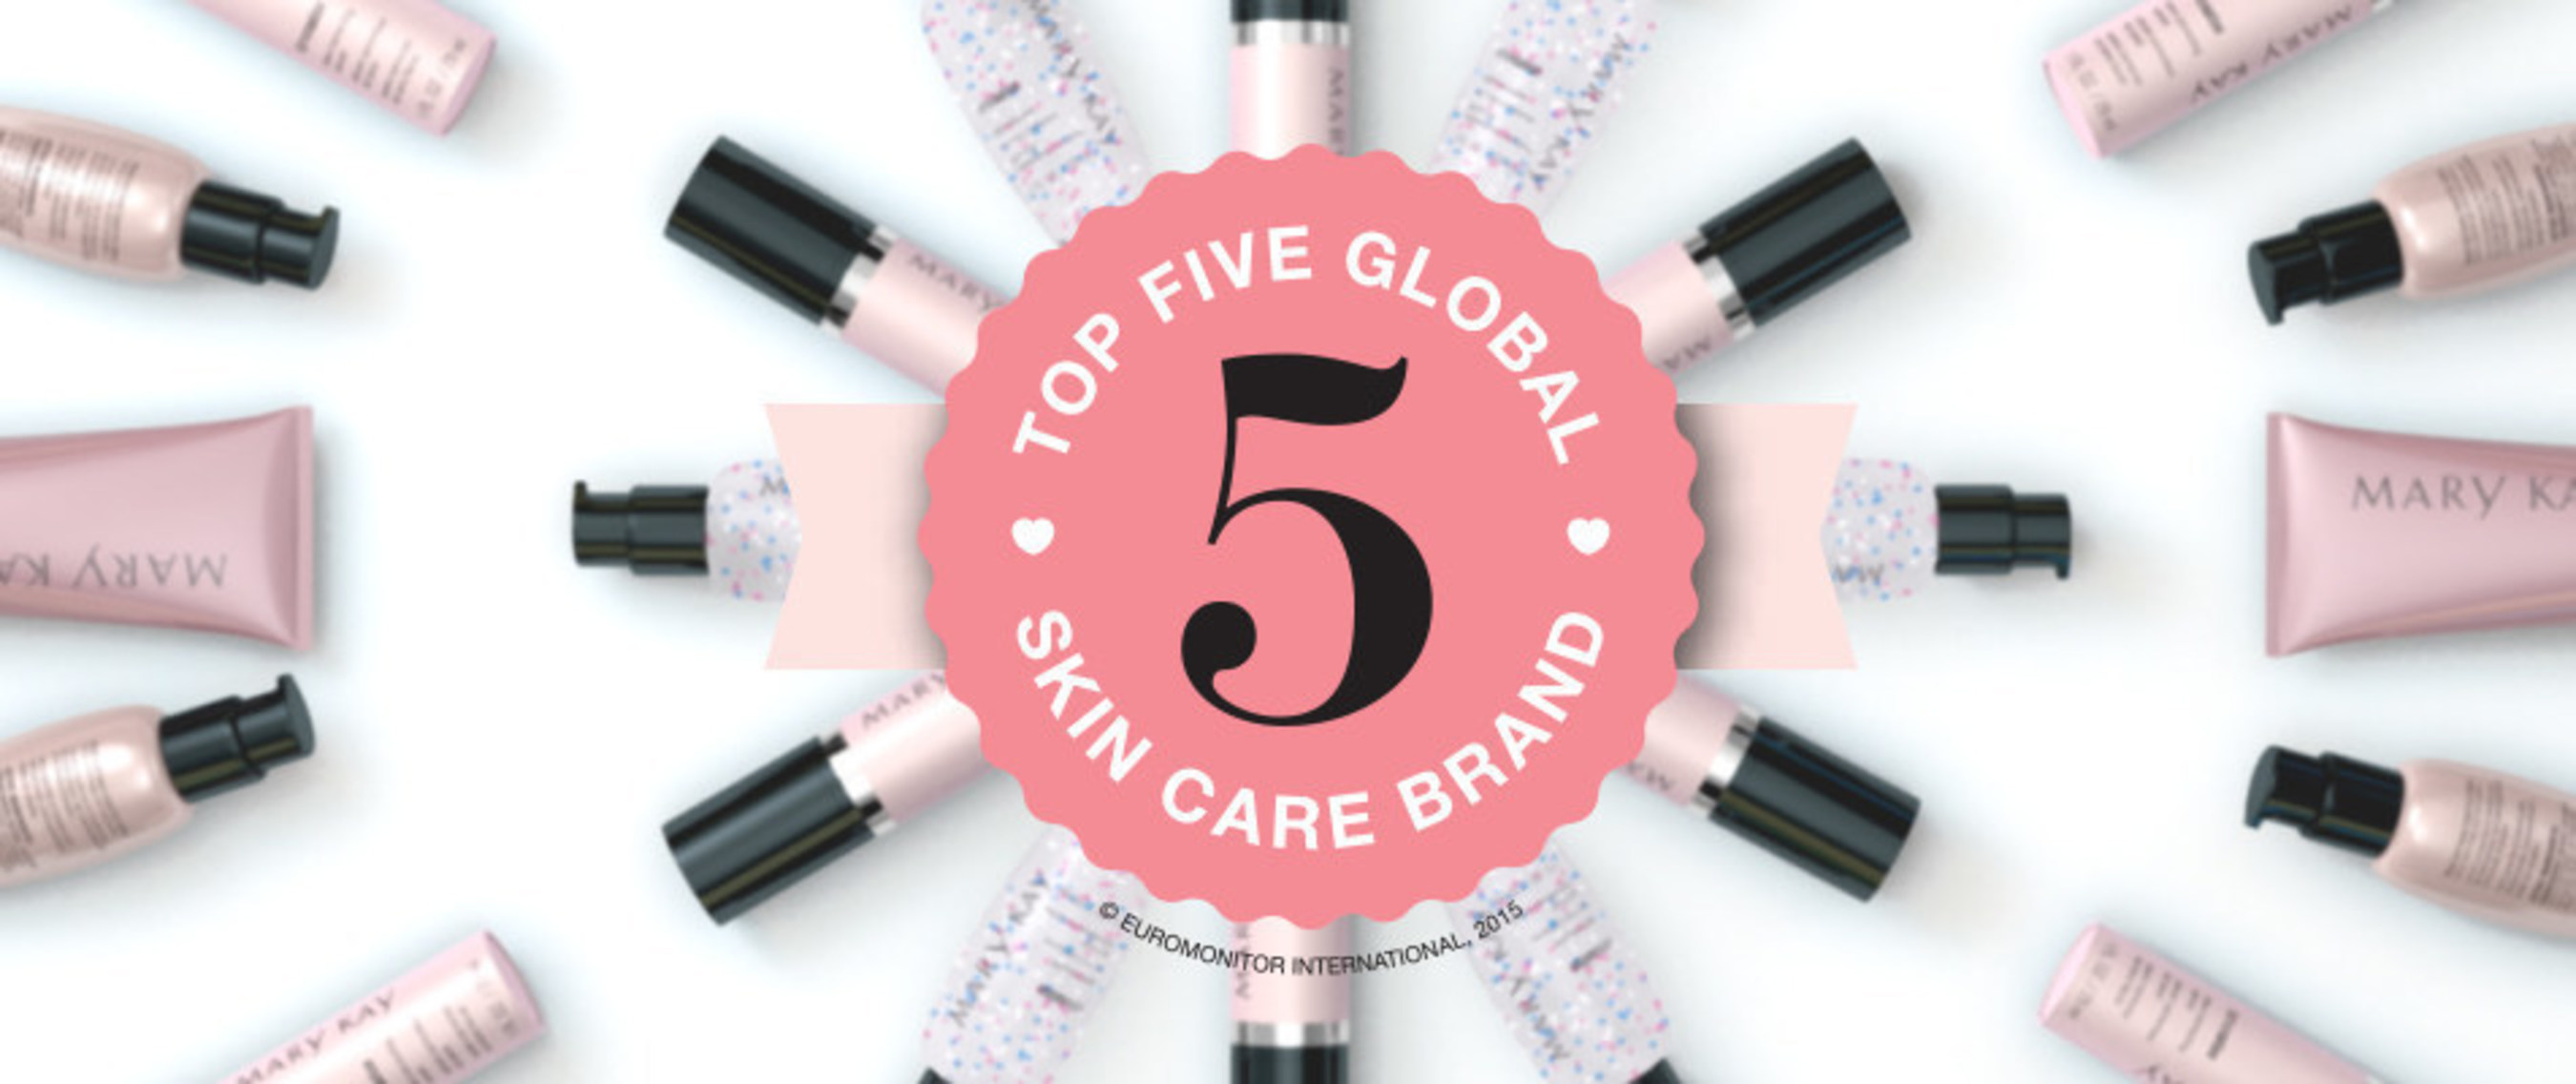 Mary Kay is now a Top 5 Global Skin Care Brand. The rankings, released by Euromonitor International, recognize the global beauty company's innovative and high-performing skin care products. Today, more than 300 Mary Kay(R) products are sold in 35 countries addressing the skin care needs of every woman and skin type.